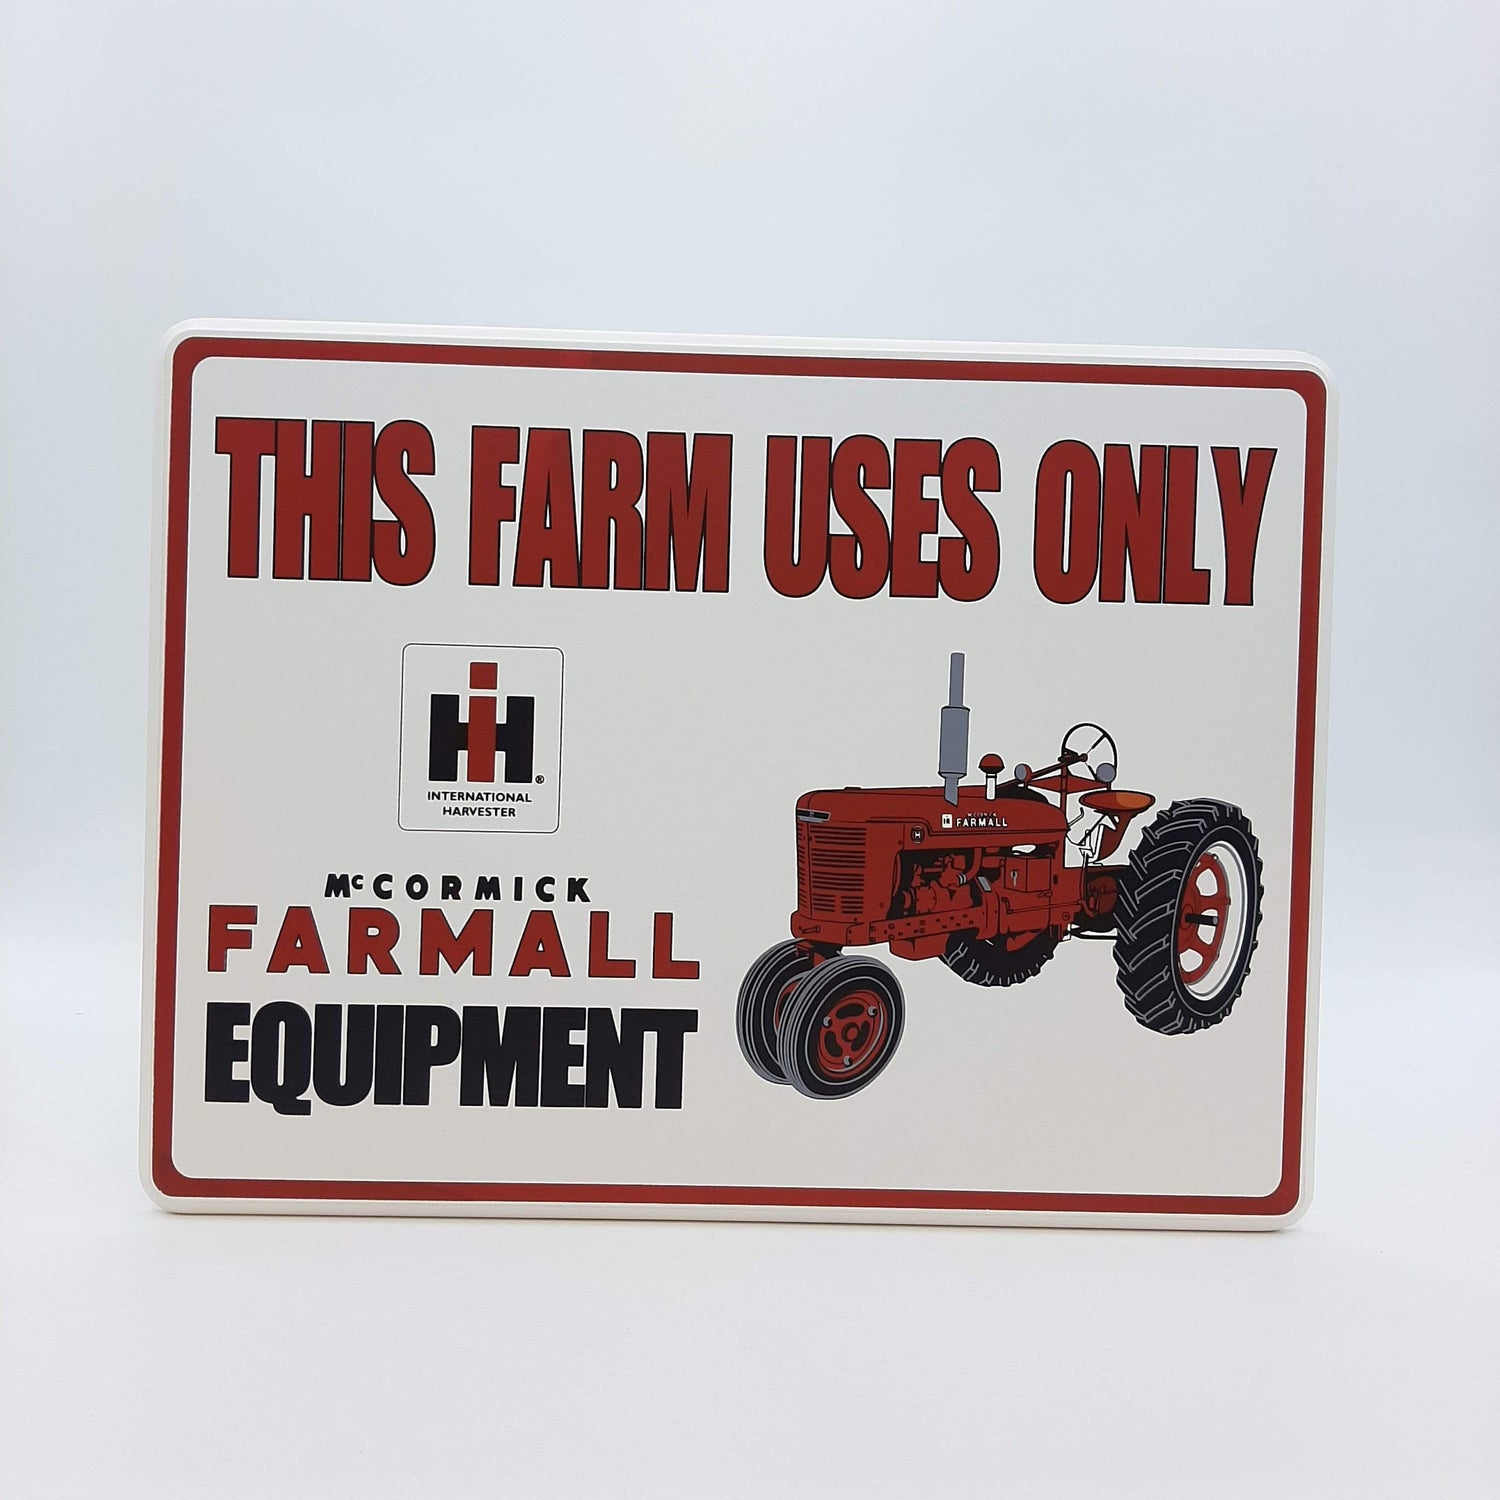 FARMALL: THIS FARM USES ONLY" SIGN